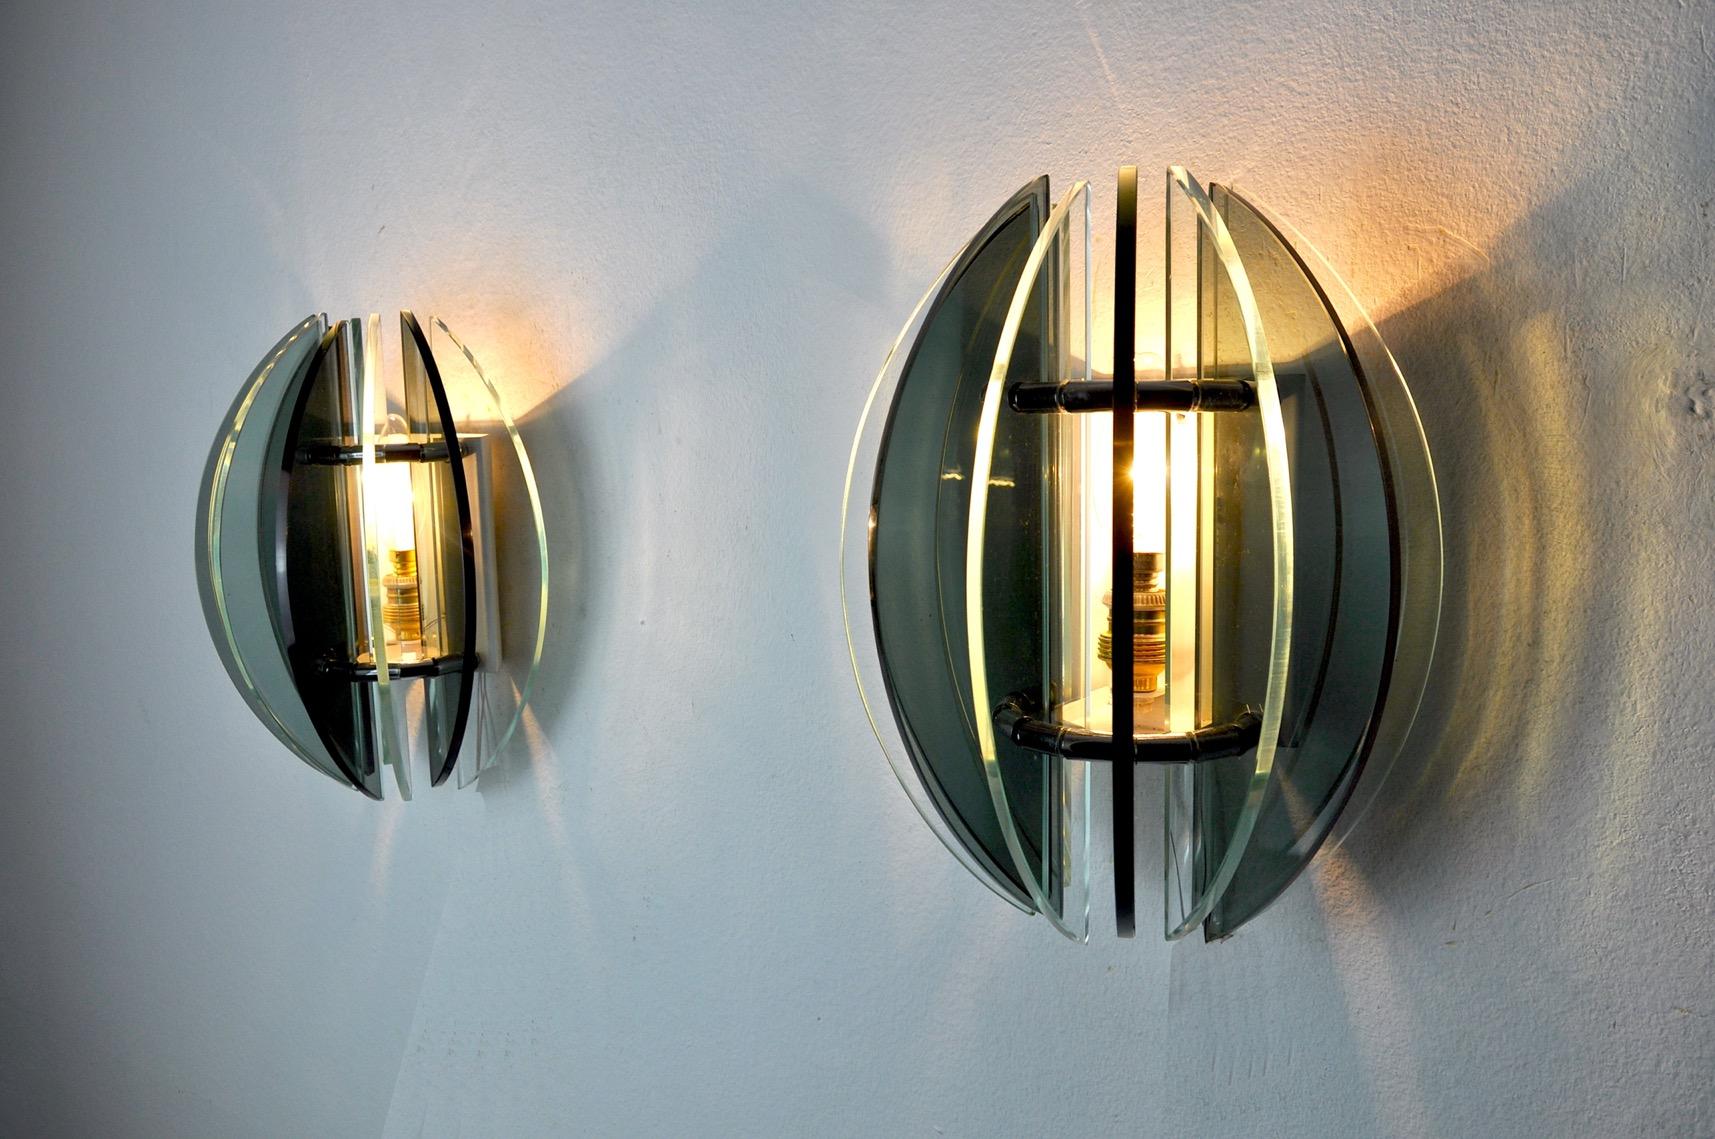 Very nice pair of veca wall lamps produced in italy in the 70s.

Wall lamps composed of black and green two-tone crystals in murano glass.

Unique object that will illuminate wonderfully and bring a real design touch to your